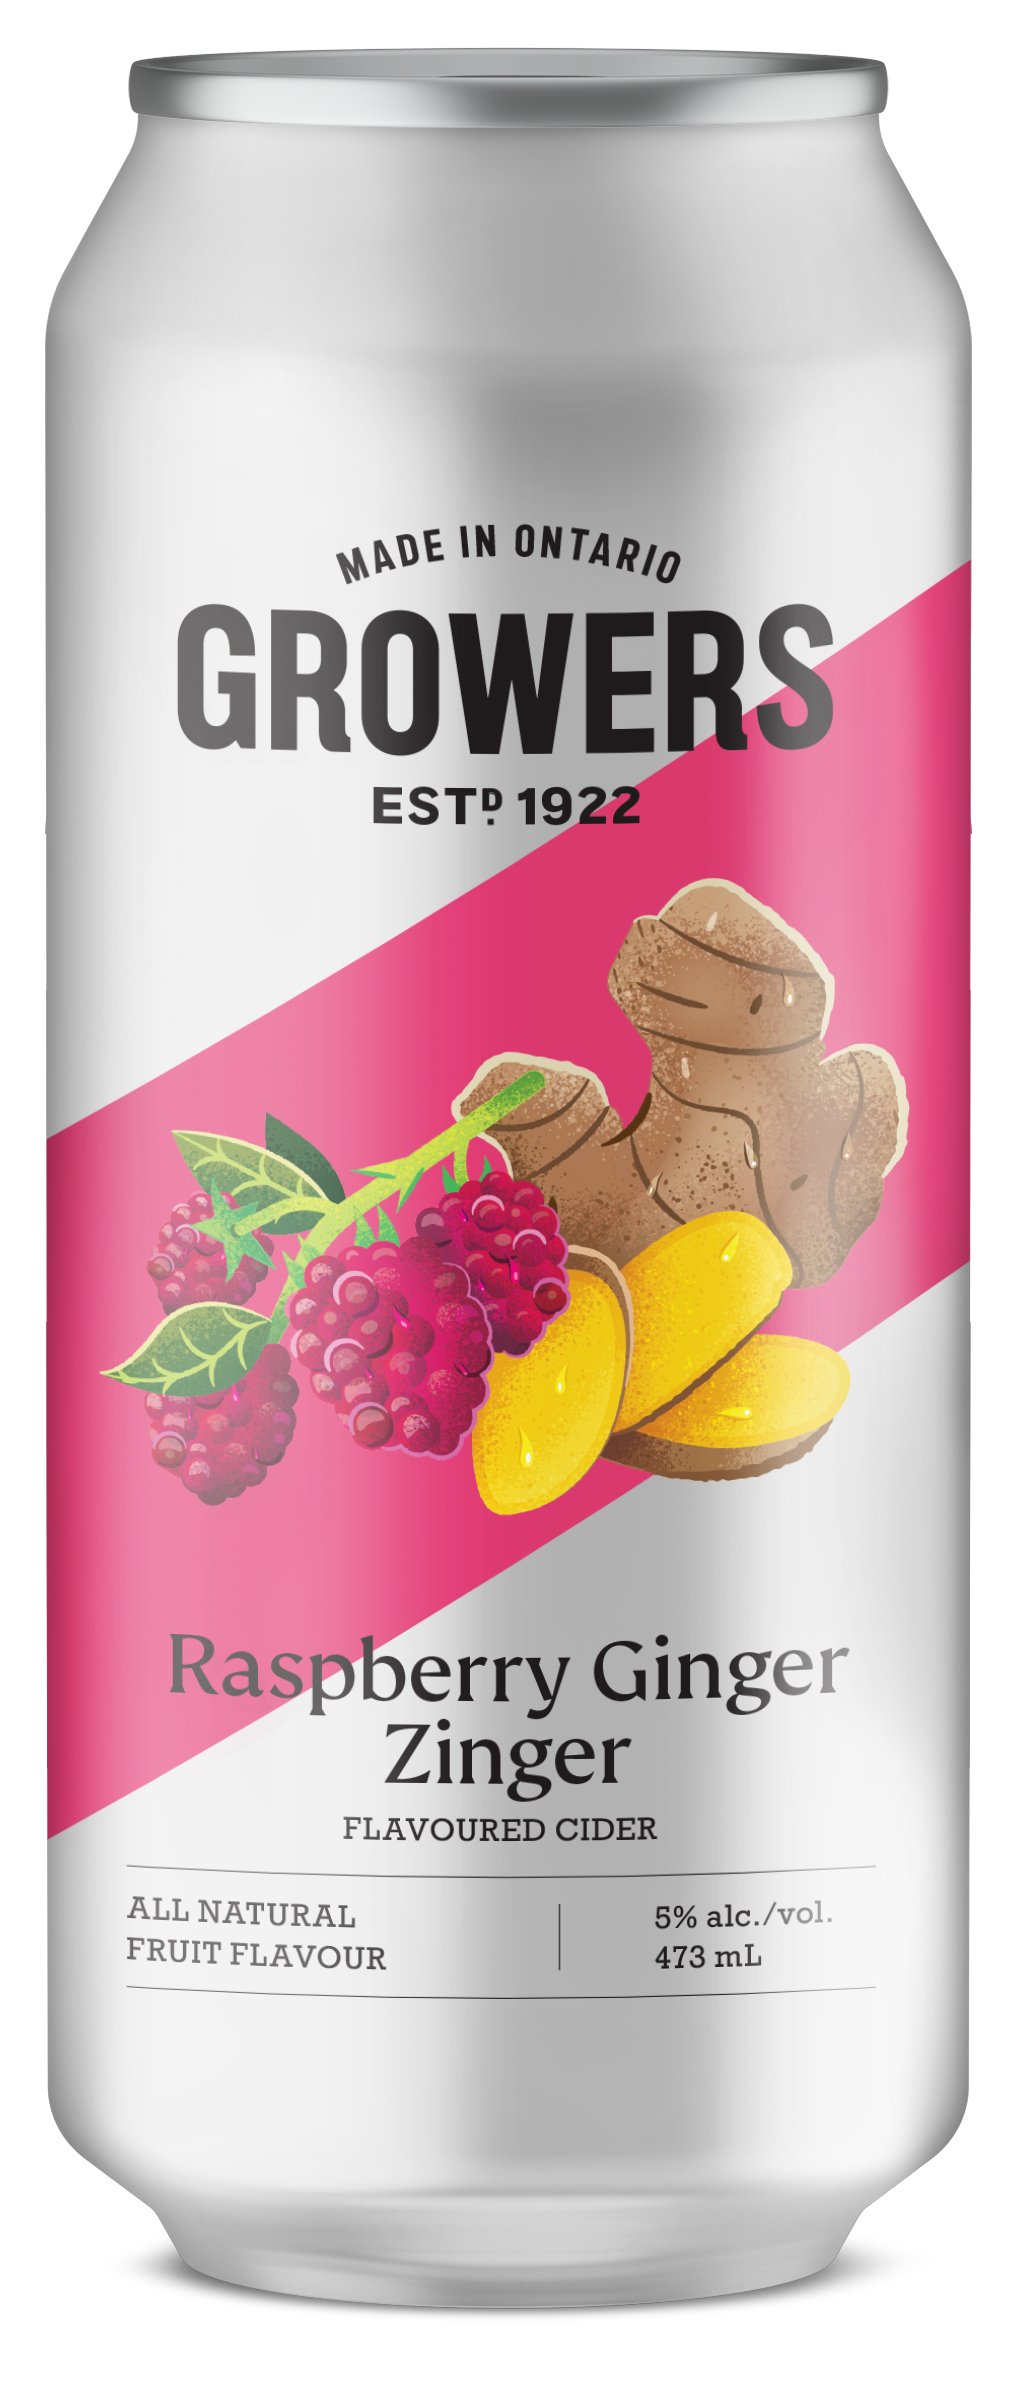 Can of Growers Raspberry Ginger Zinger cider